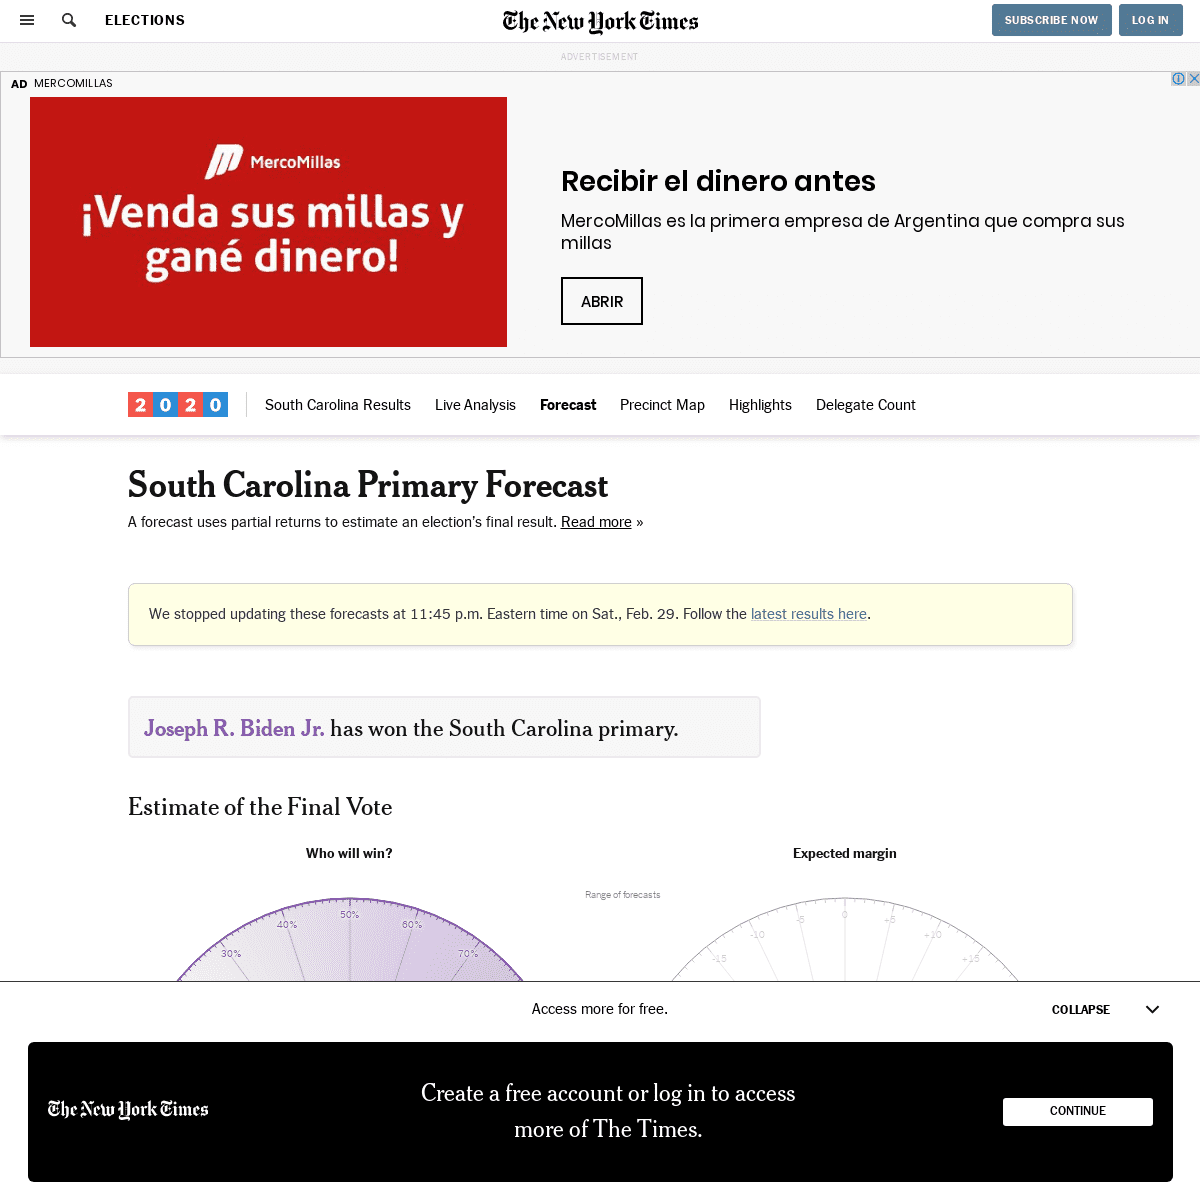 A complete backup of www.nytimes.com/interactive/2020/02/29/us/elections/results-south-carolina-live-forecast.html